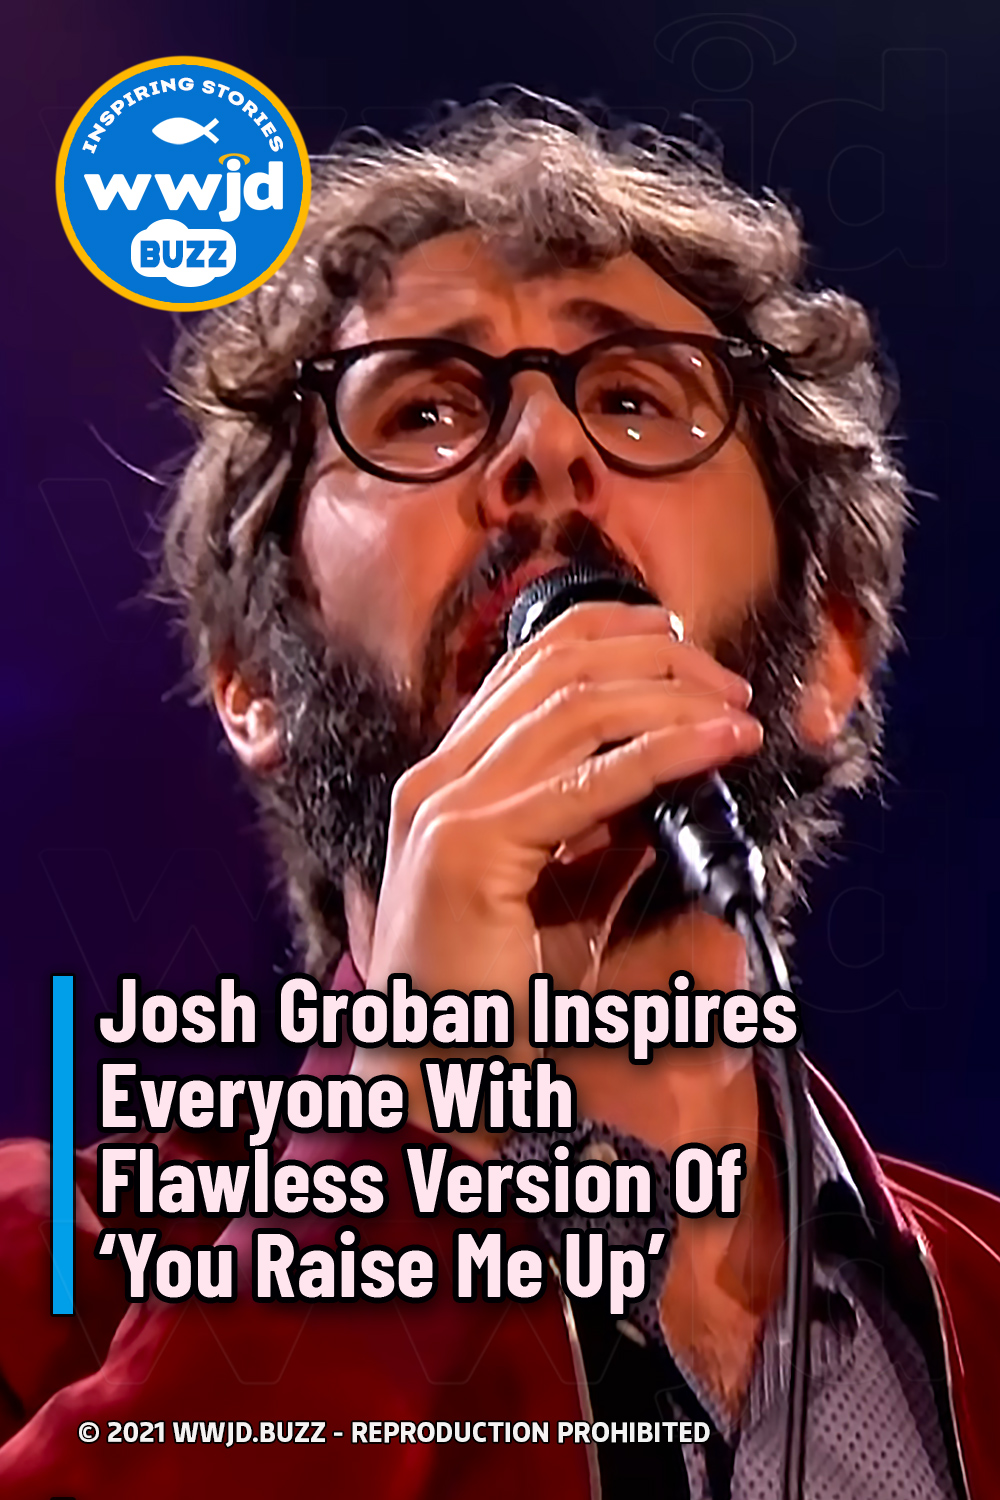 Josh Groban Inspires Everyone With Flawless Version Of \'You Raise Me Up\'